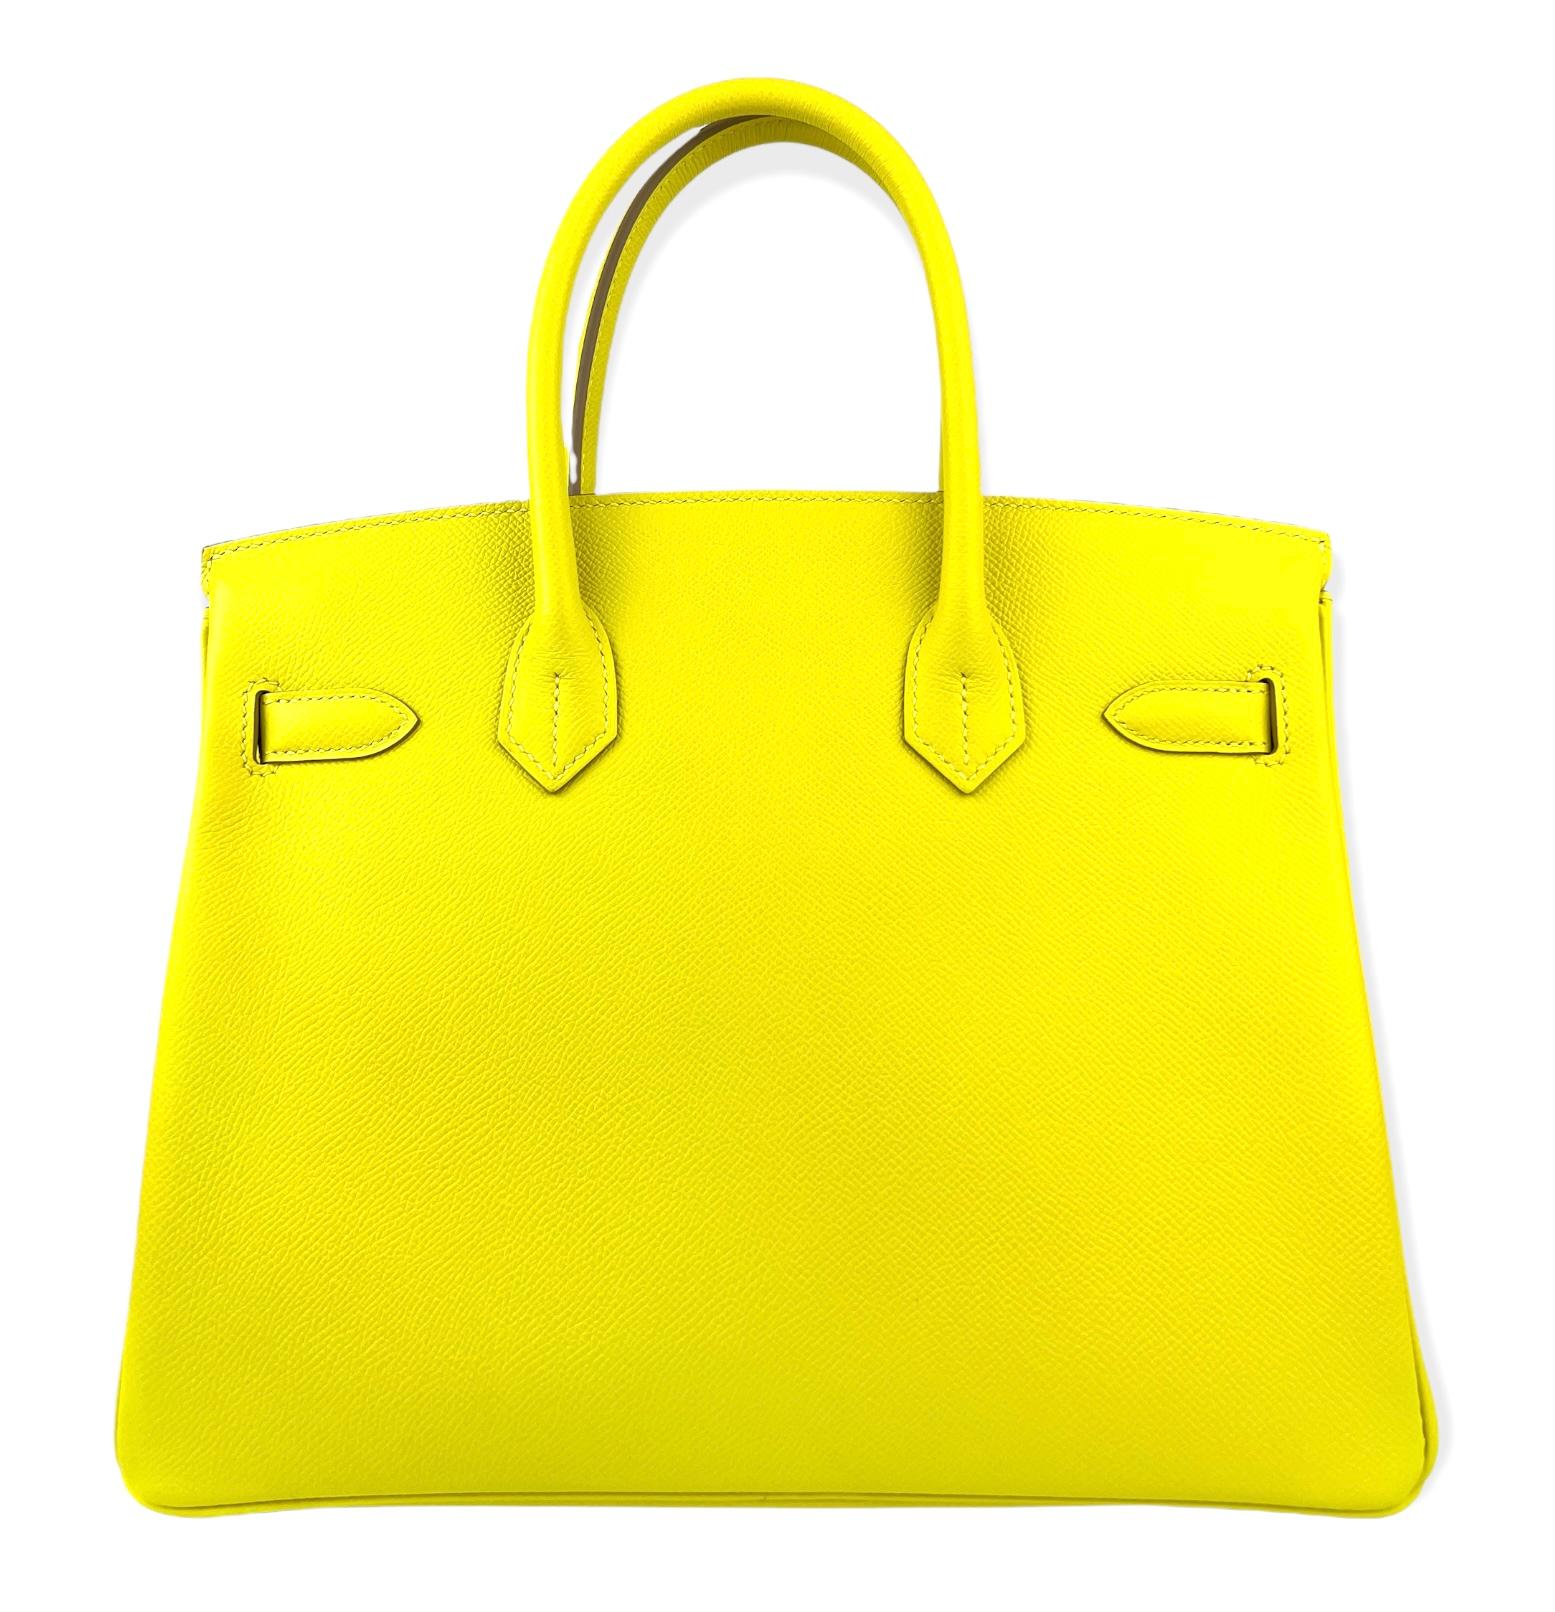 Hermes Birkin 30 Lime Yellow Epsom Leather Gold Hardware 2020  In New Condition For Sale In Miami, FL